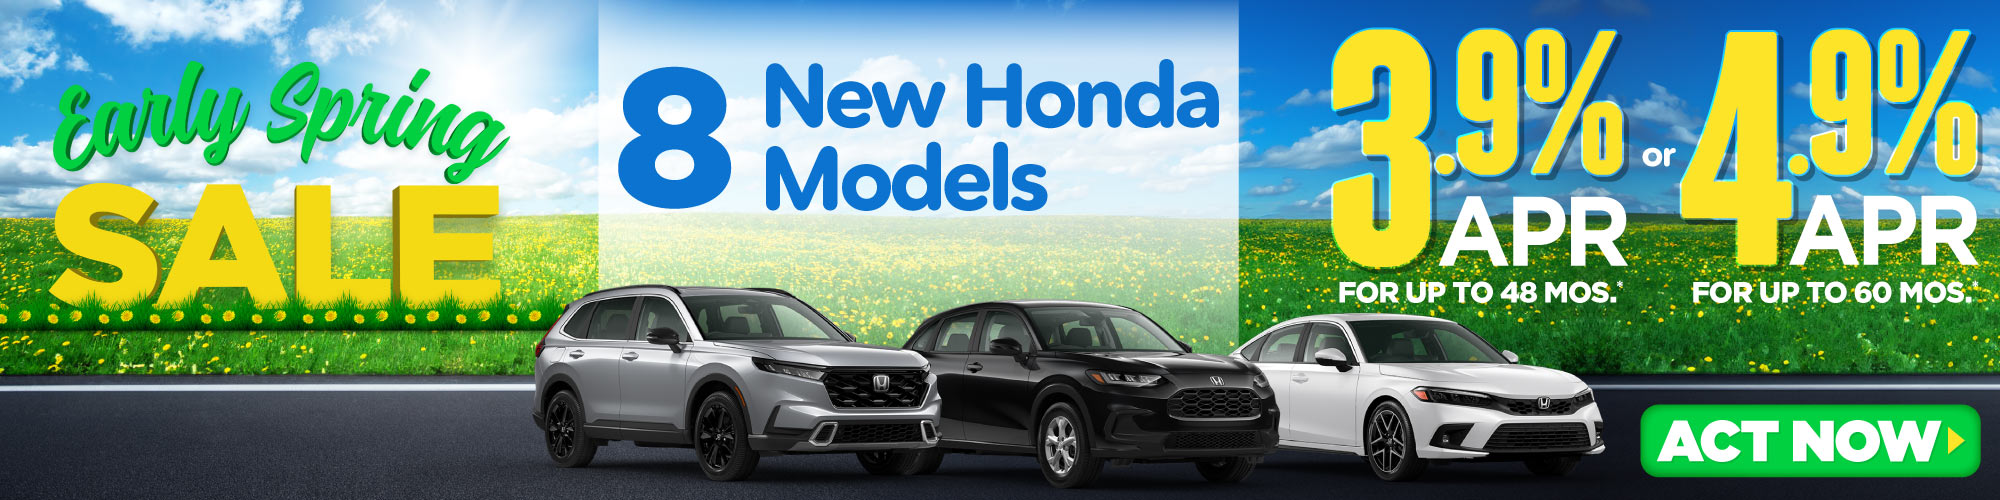 New 2022 Honda Pilot | 0% APR for up to 24-36 months or 1.9% APR for up to 49-60 mos or 2.9% APR for up to 61-72 mos. | Act Now